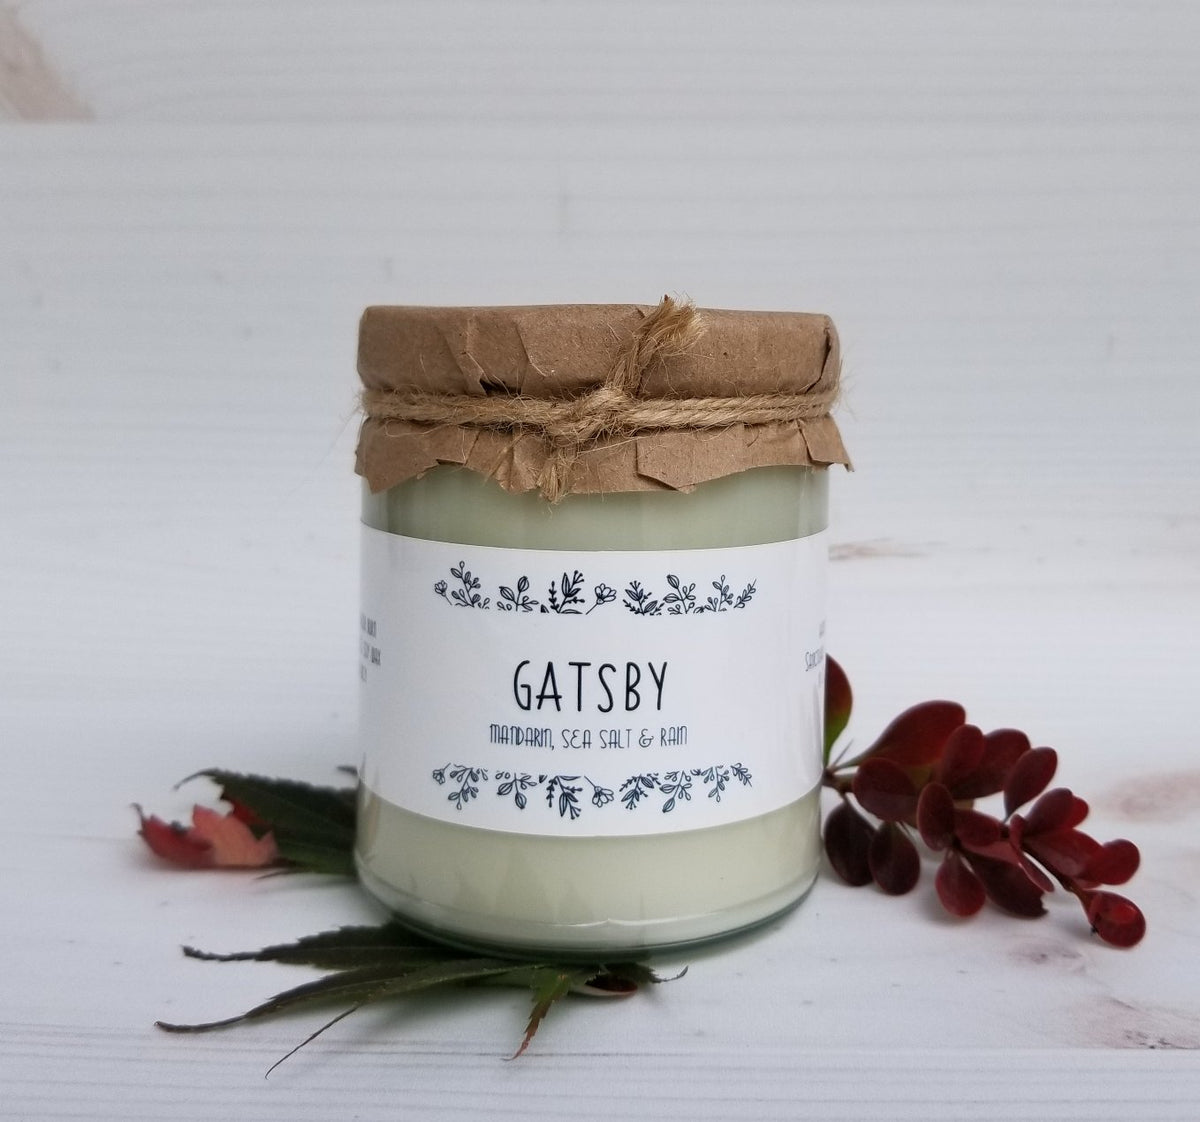 Sanctuary Soy Candle Gatsby